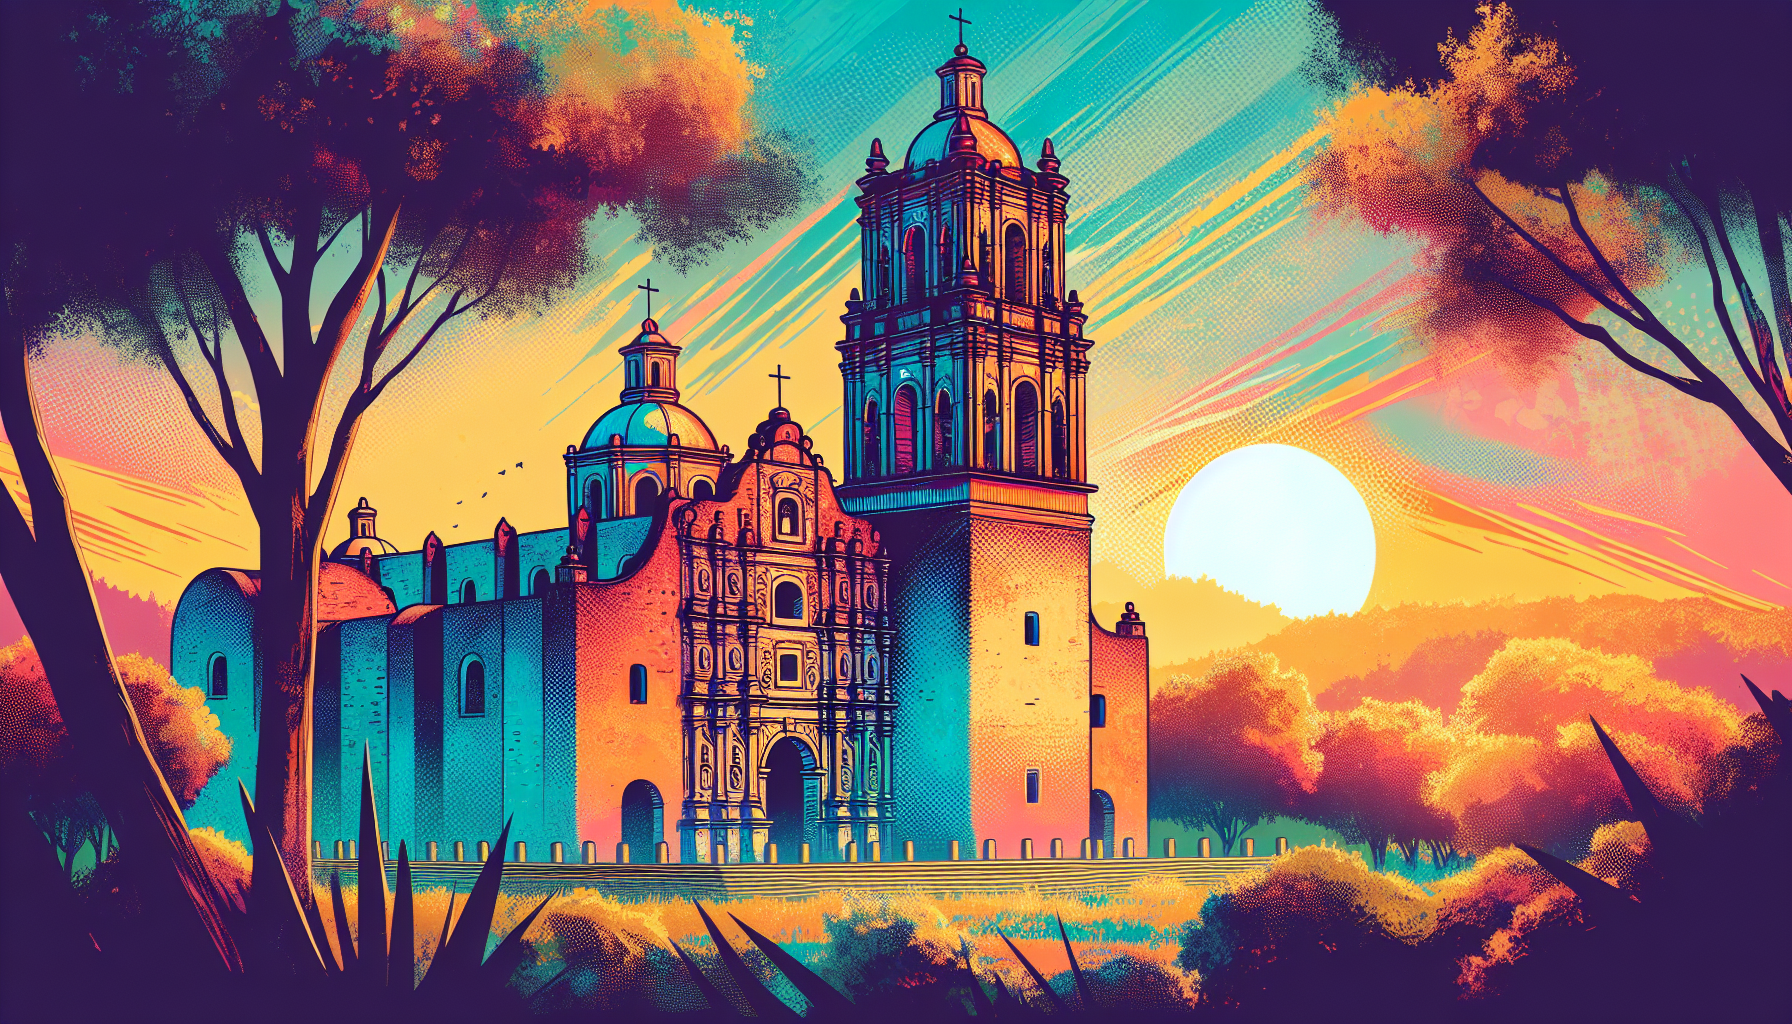 Create an image of the oldest church in Mexico enveloped in the soft, warm glow of the setting sun, showcasing its historic architecture and rich cultural significance. The church should be surrounded